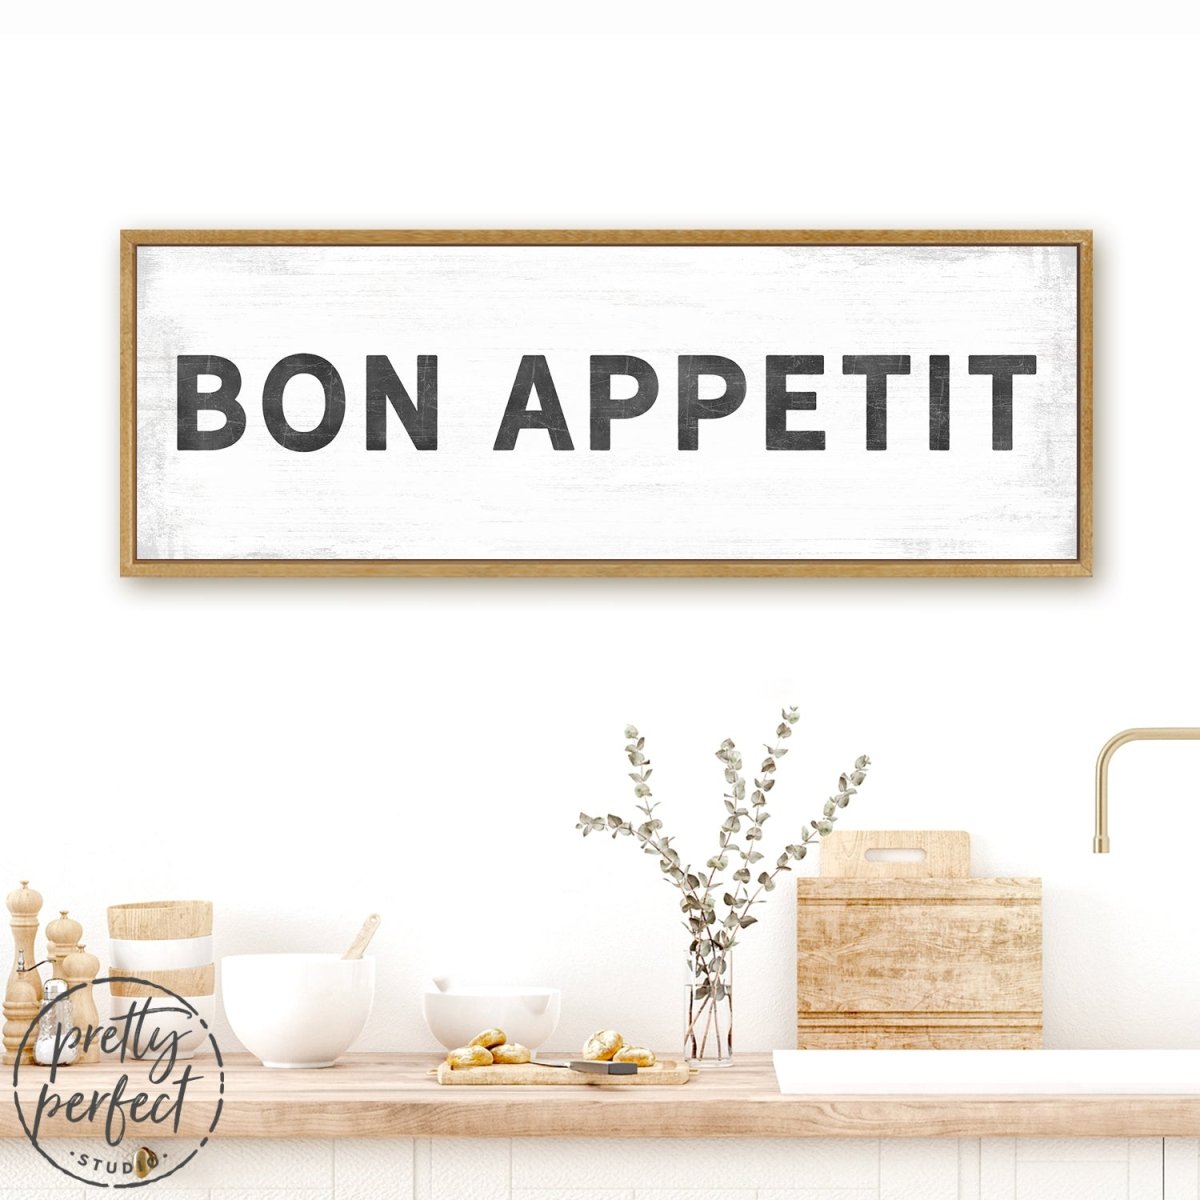 Bon Appetit Large Canvas Sign For Kitchen Or Dining Room Above Kitchen Table - Pretty Perfect Studio